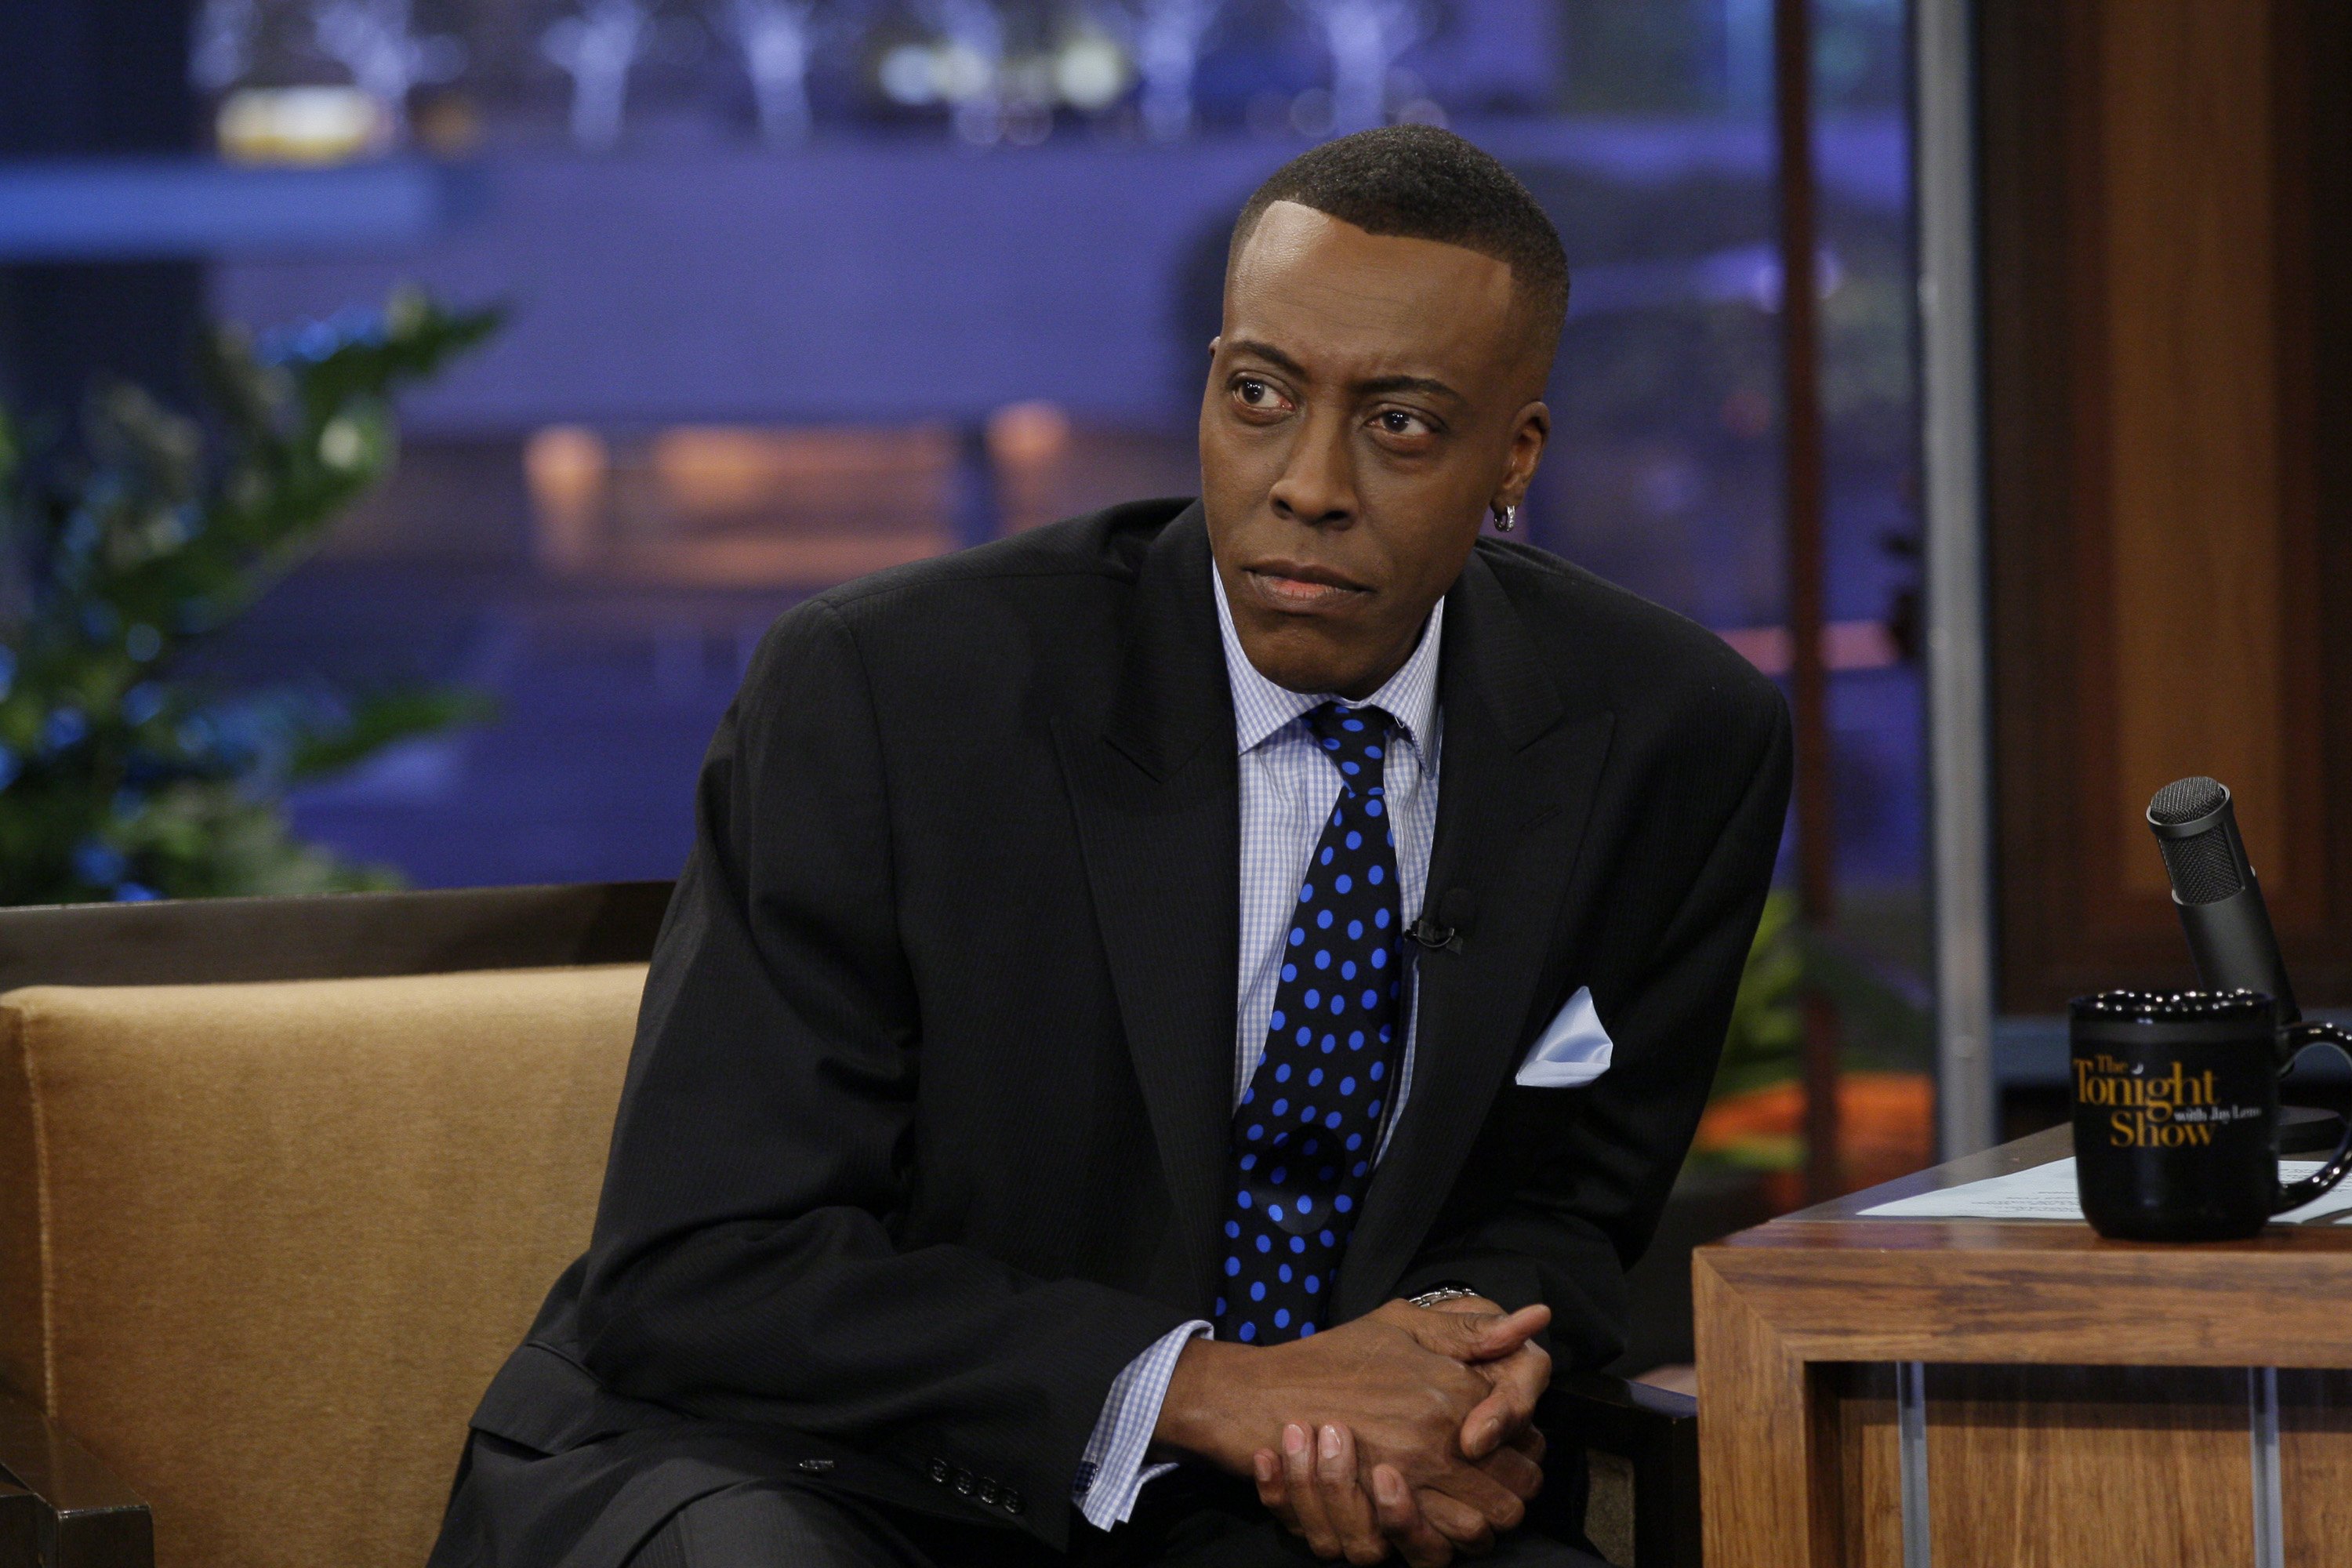  Arsenio Hall during an interview on "The Tonight Show with Jay Leno," March 22, 2012 | Photo: GettyImages